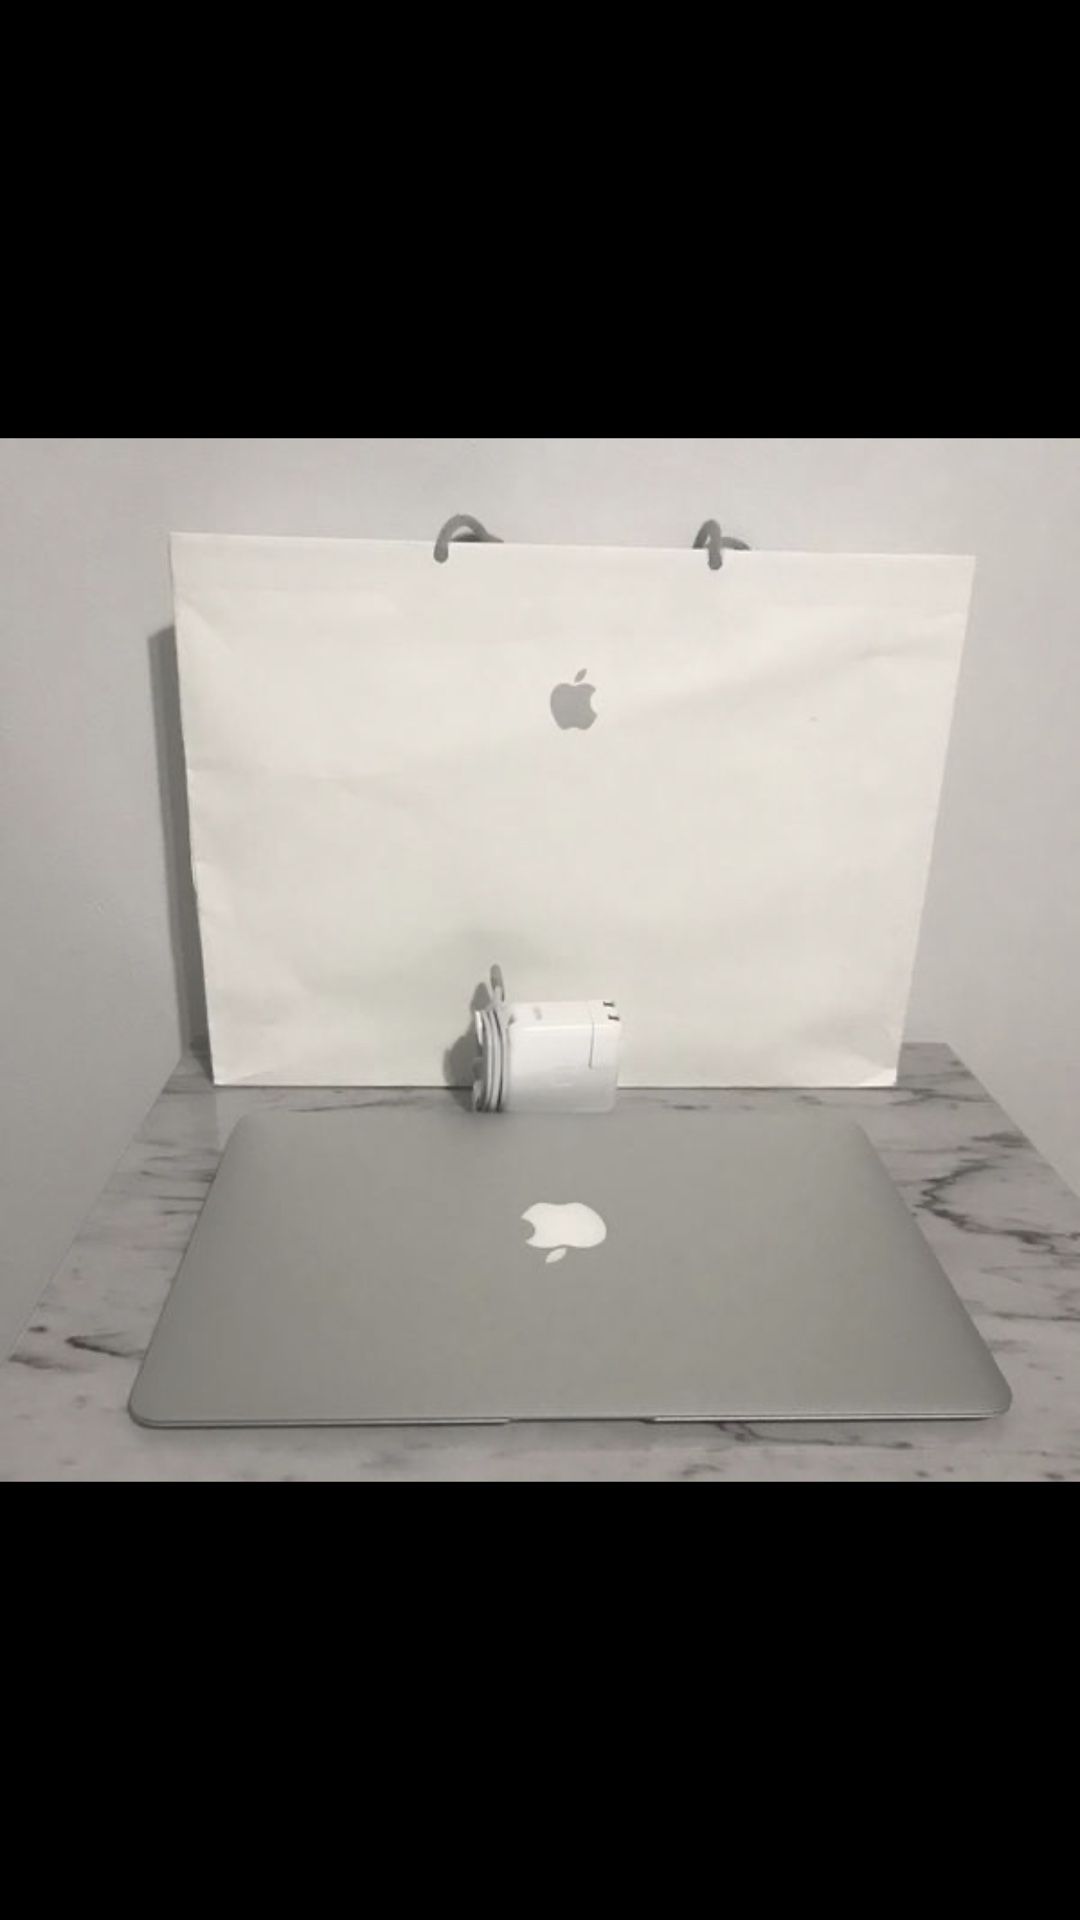 Like new 2017 MacBook Air 13” i5 8GB 128 GB SSD AppleCare + until 9/2/21 warranty - Like new with box and receipt —-5⭐️⭐️⭐️⭐️⭐️ Seller 👀👈